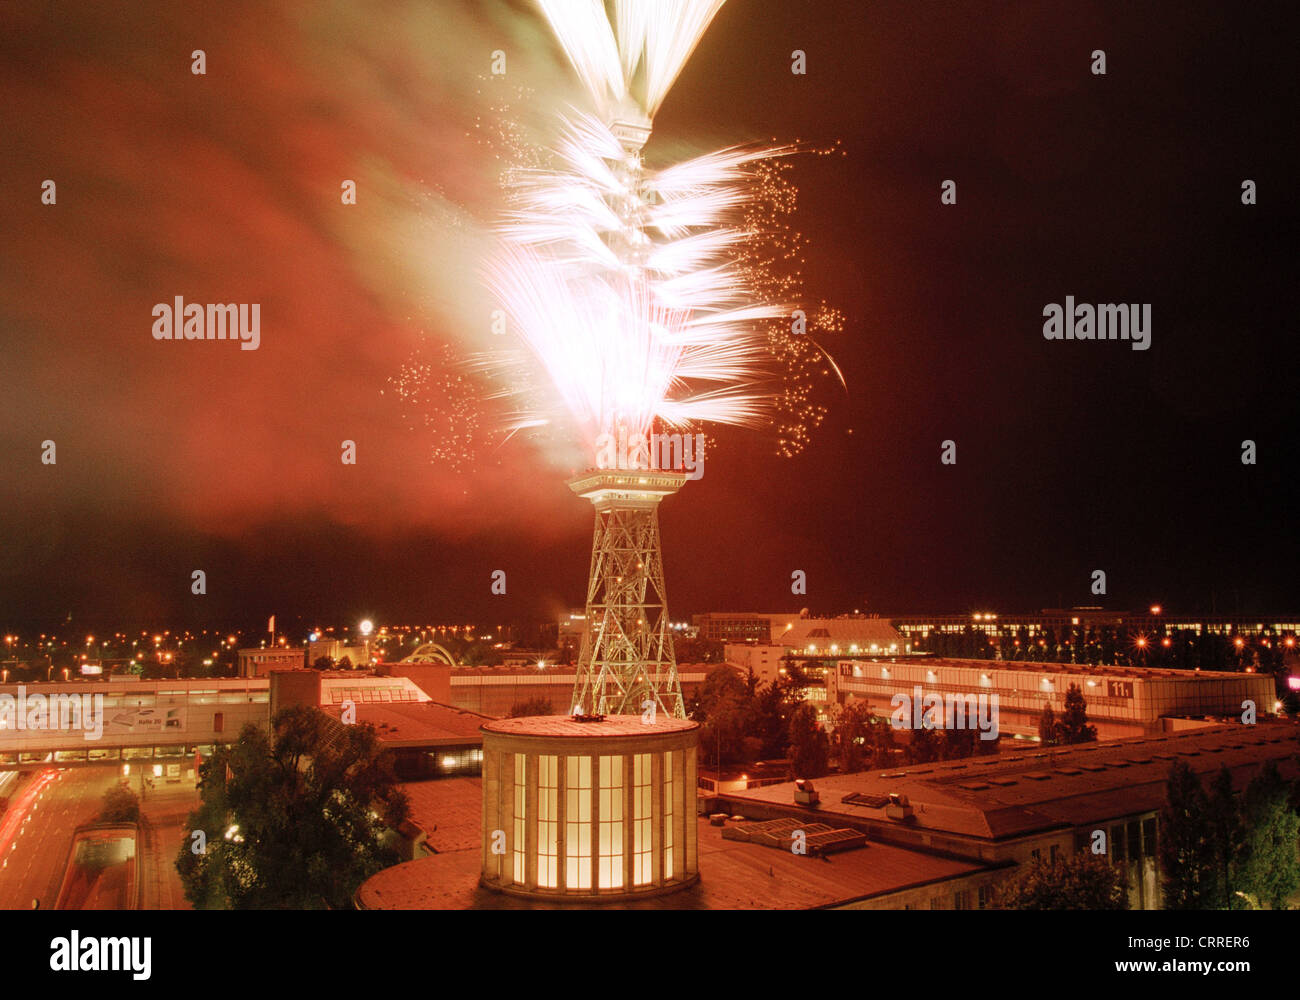 Night view of the radio tower in Berlin with fireworks Stock Photo